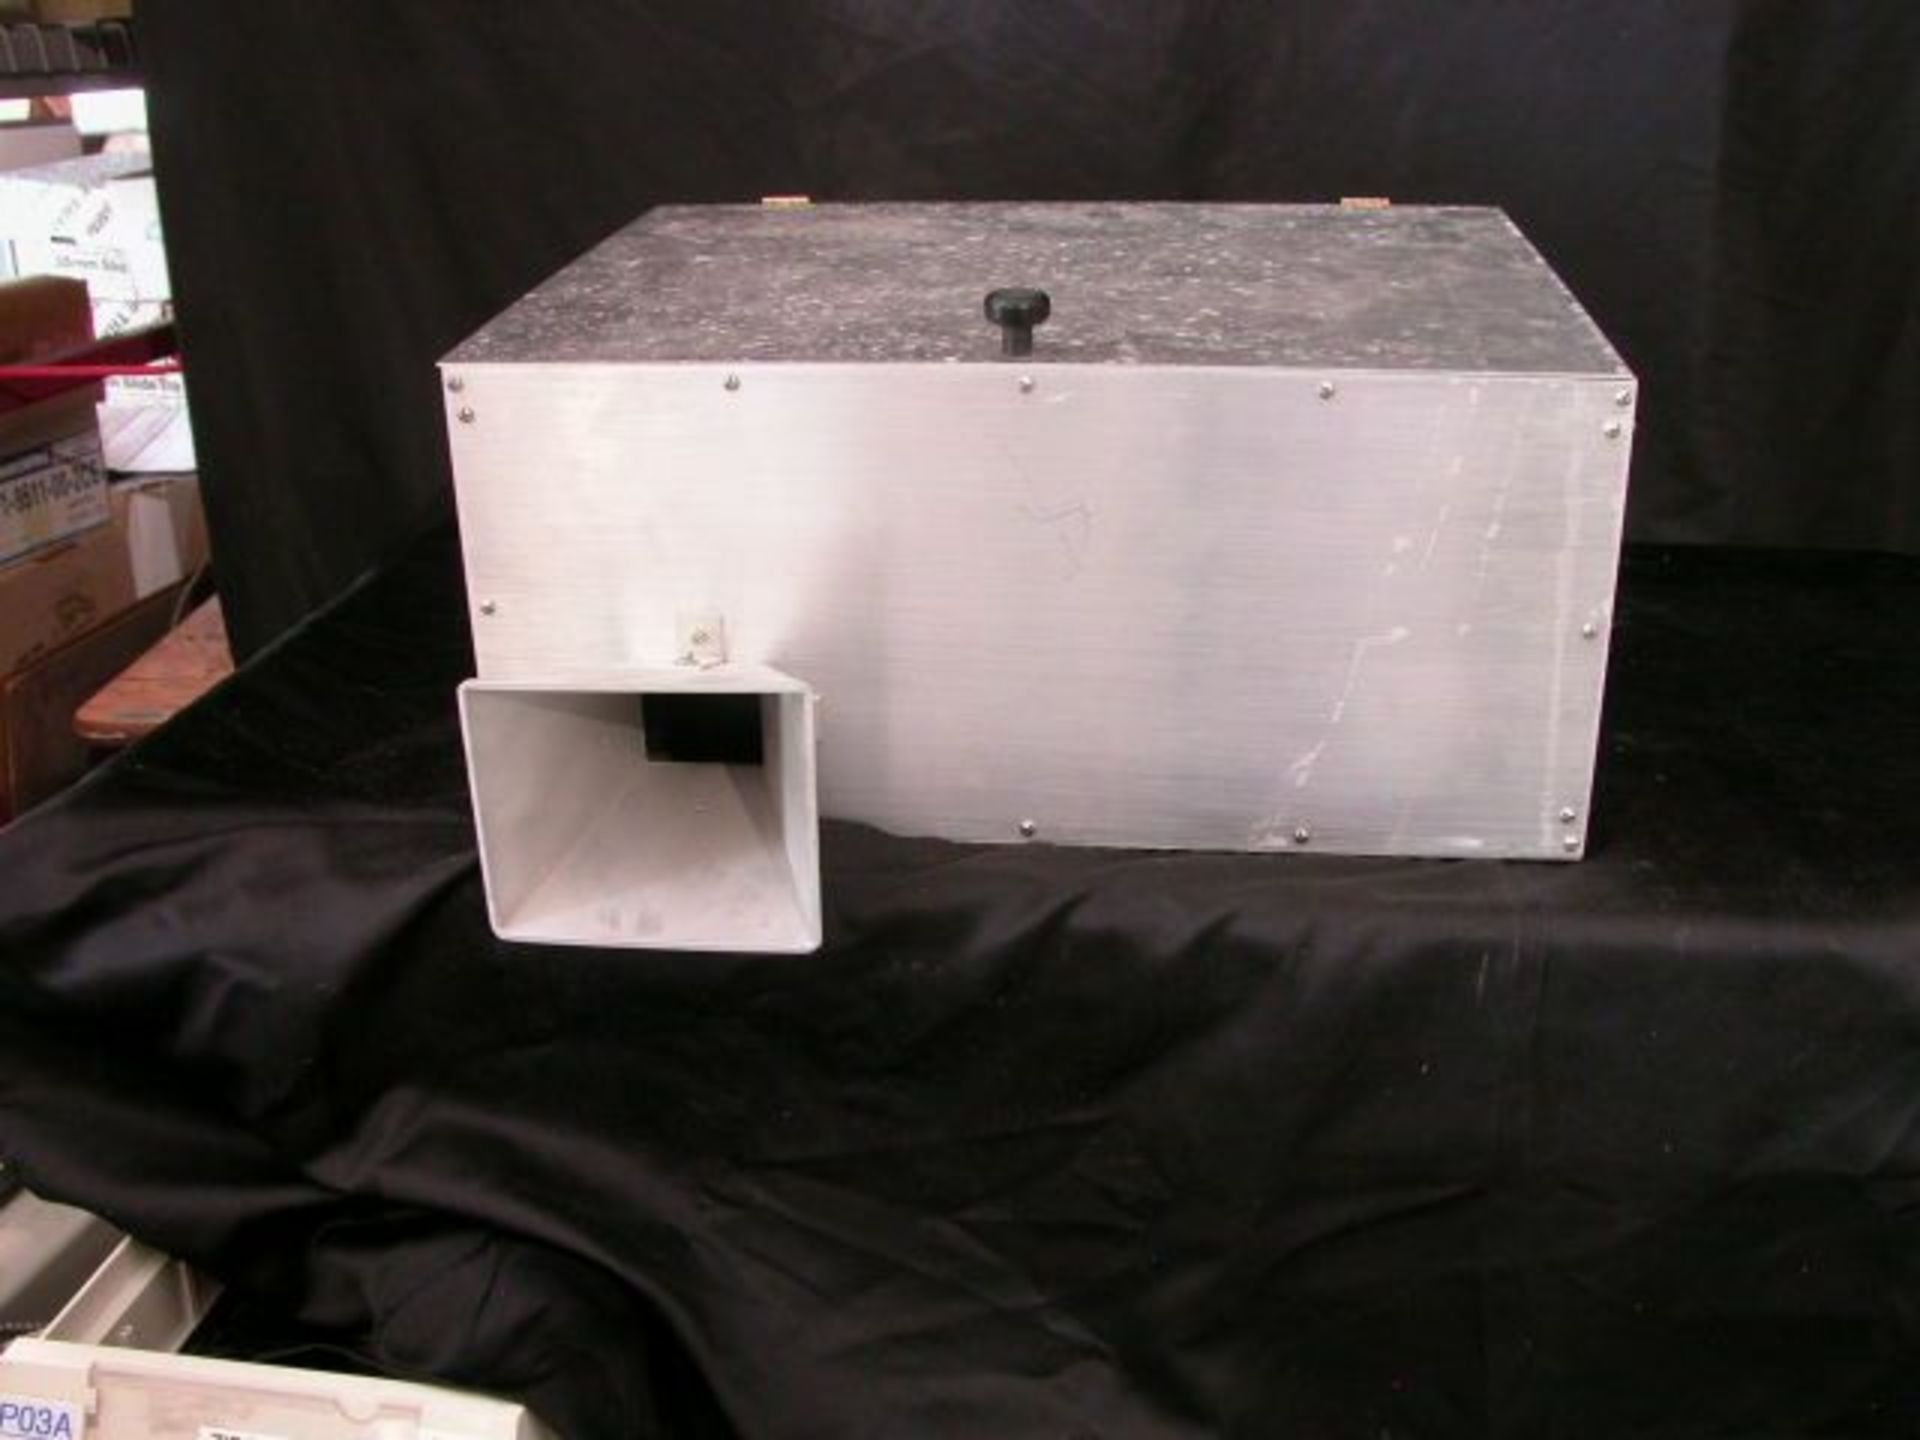 Aluminum Rodent Testing Cage Box Apparatus, Qty 1, 330958320420